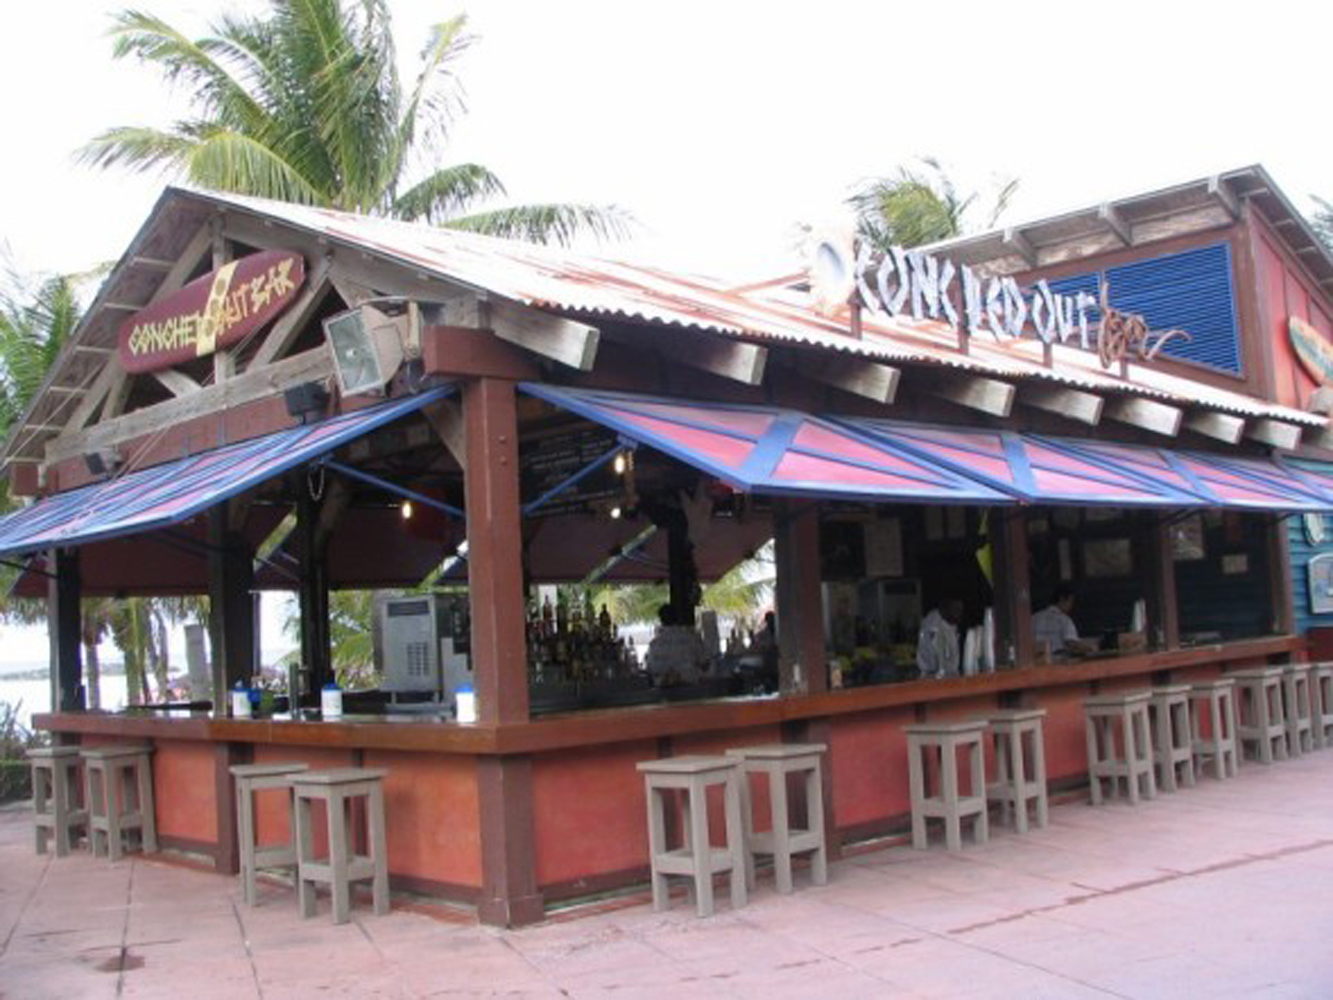 Castaway Cay - Conched Out Bar